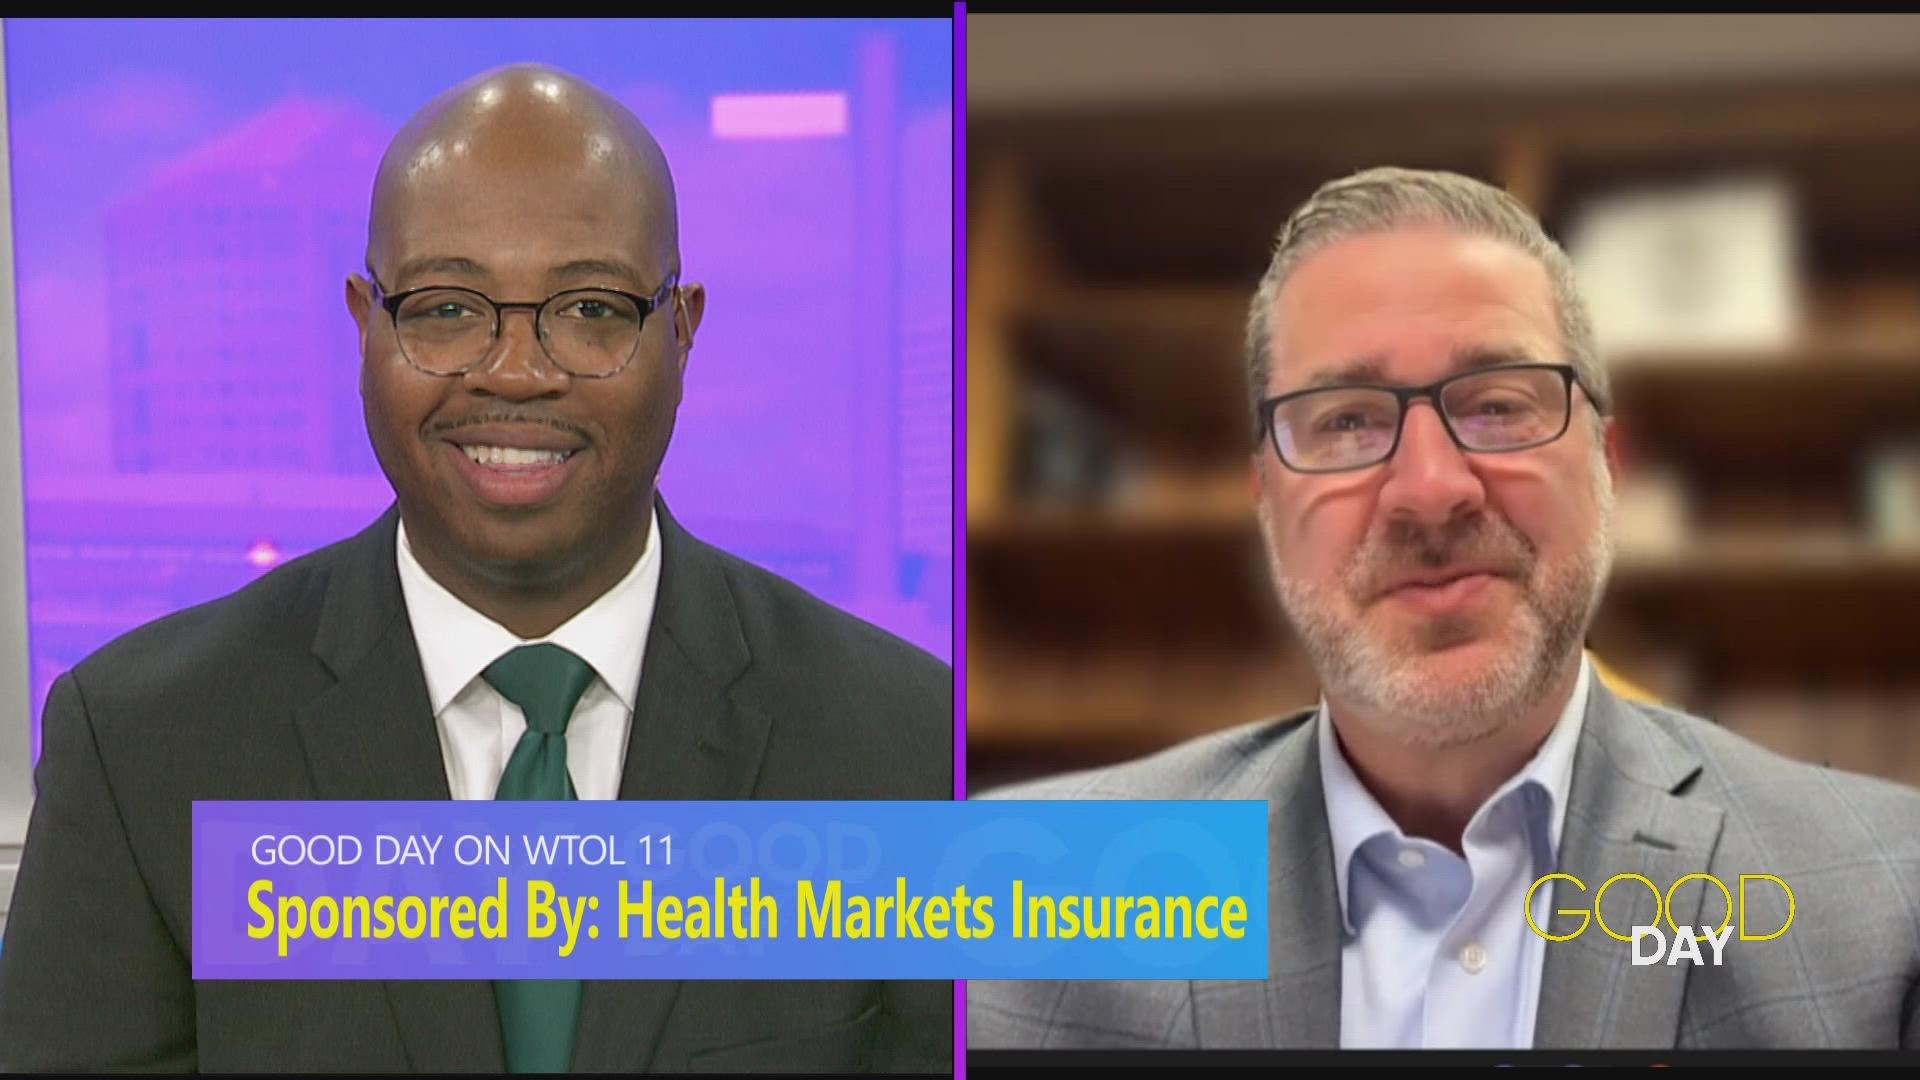 WTOL 11 sponsor Health Markets Insurance offers free insurance consultations to help prepare you for the unexpected.